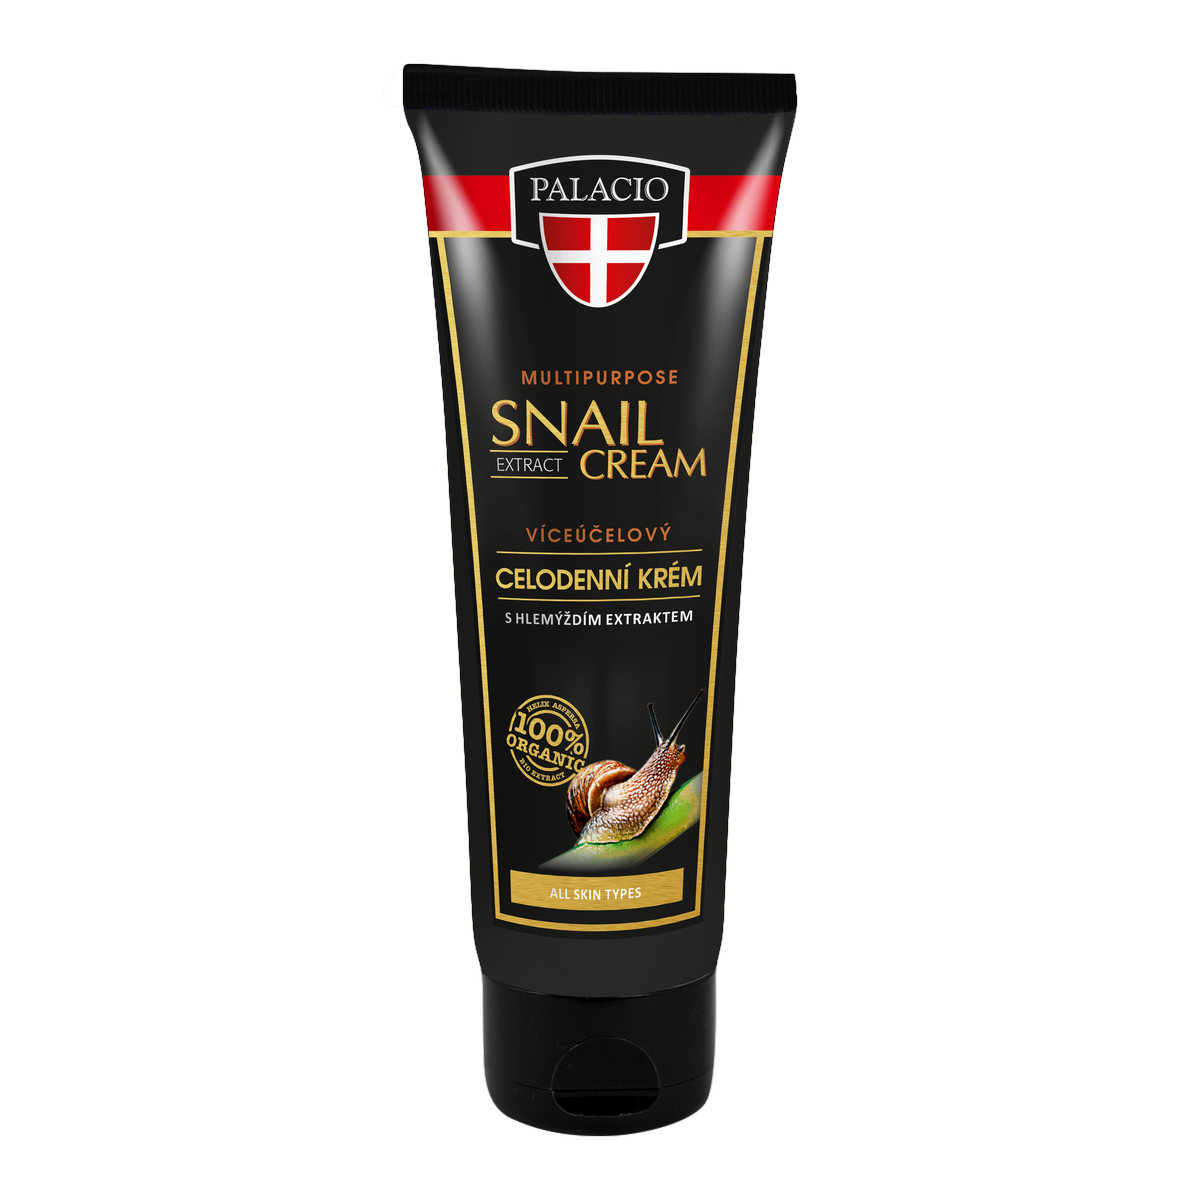 SNAIL EXTRACT Multipurpouse Cream 125ml P1305 ENG WEB 51